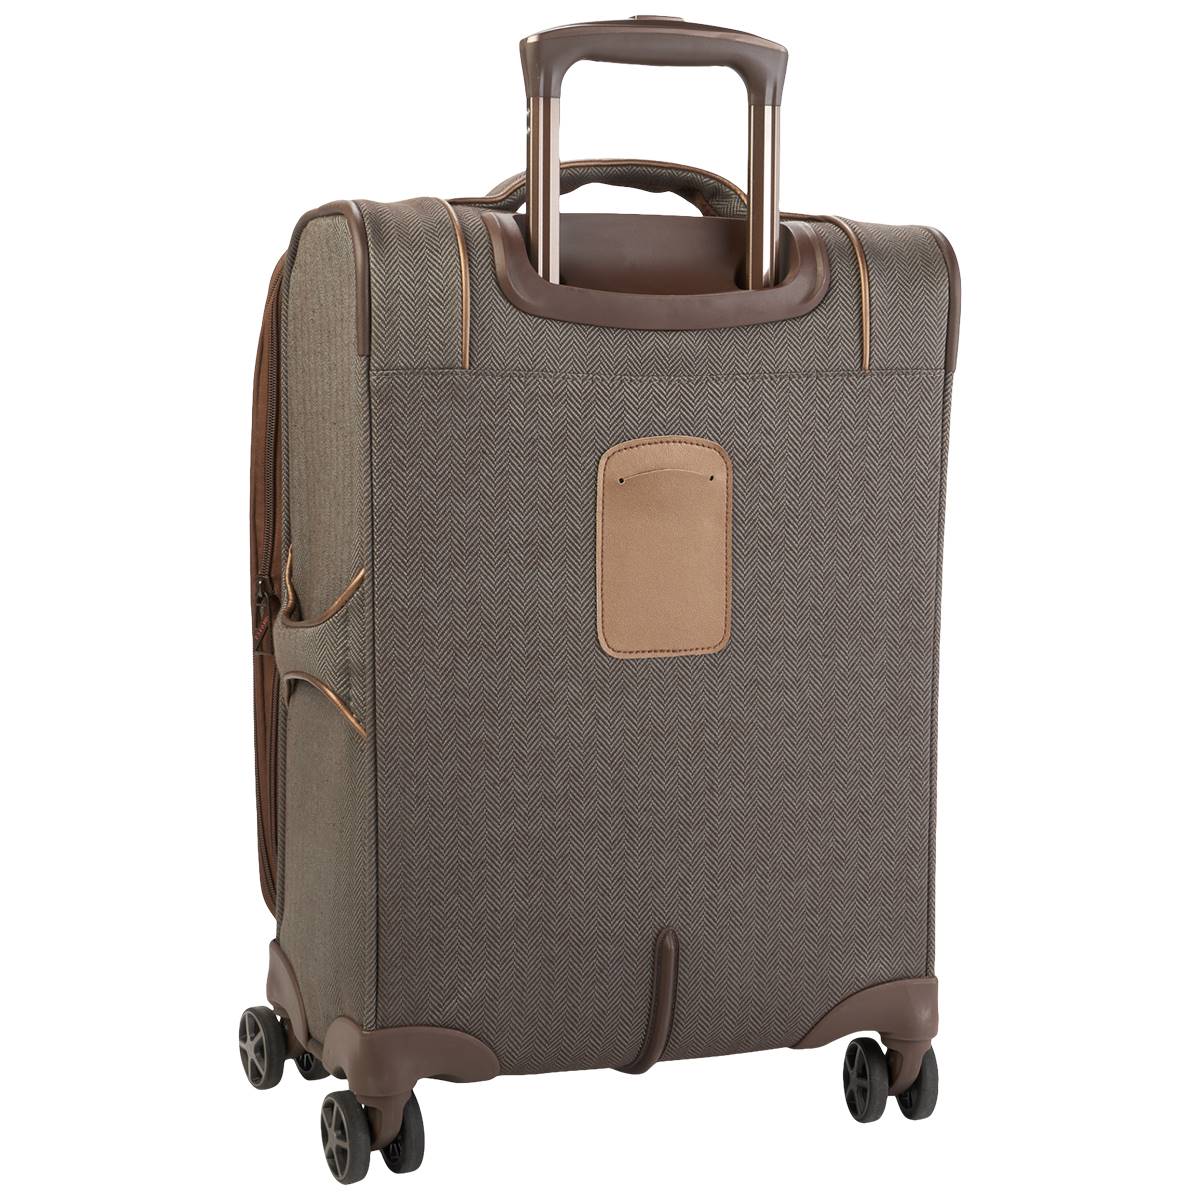 London Fog Newcastle 20in. Spinner Carry-On Luggage